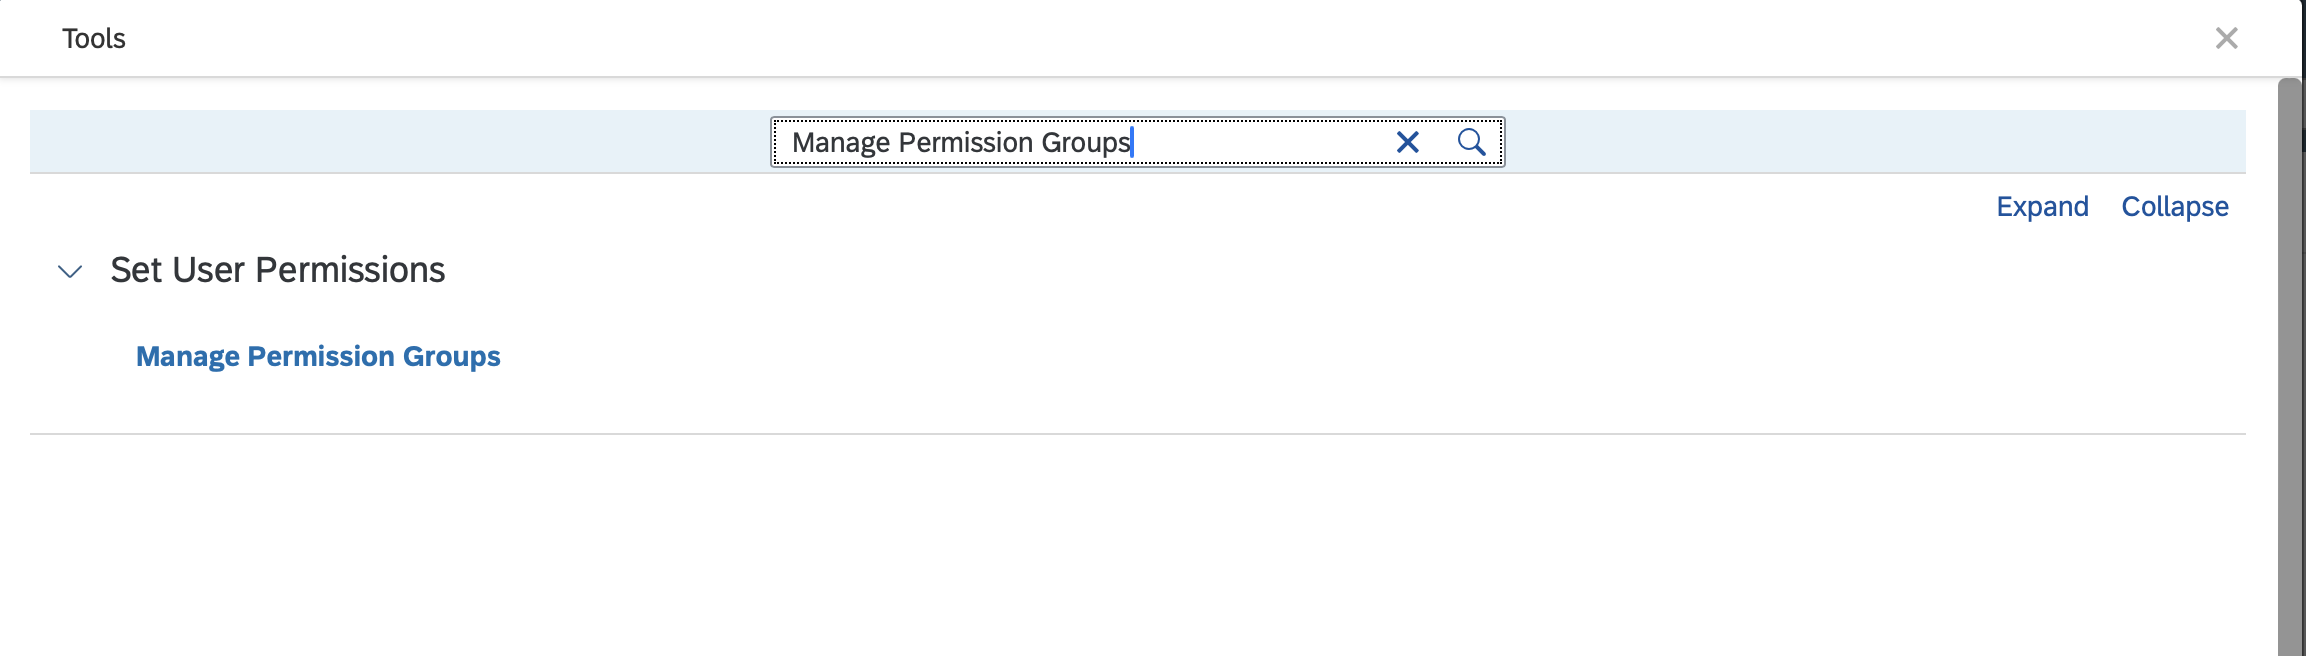 Manage Permissions Groups